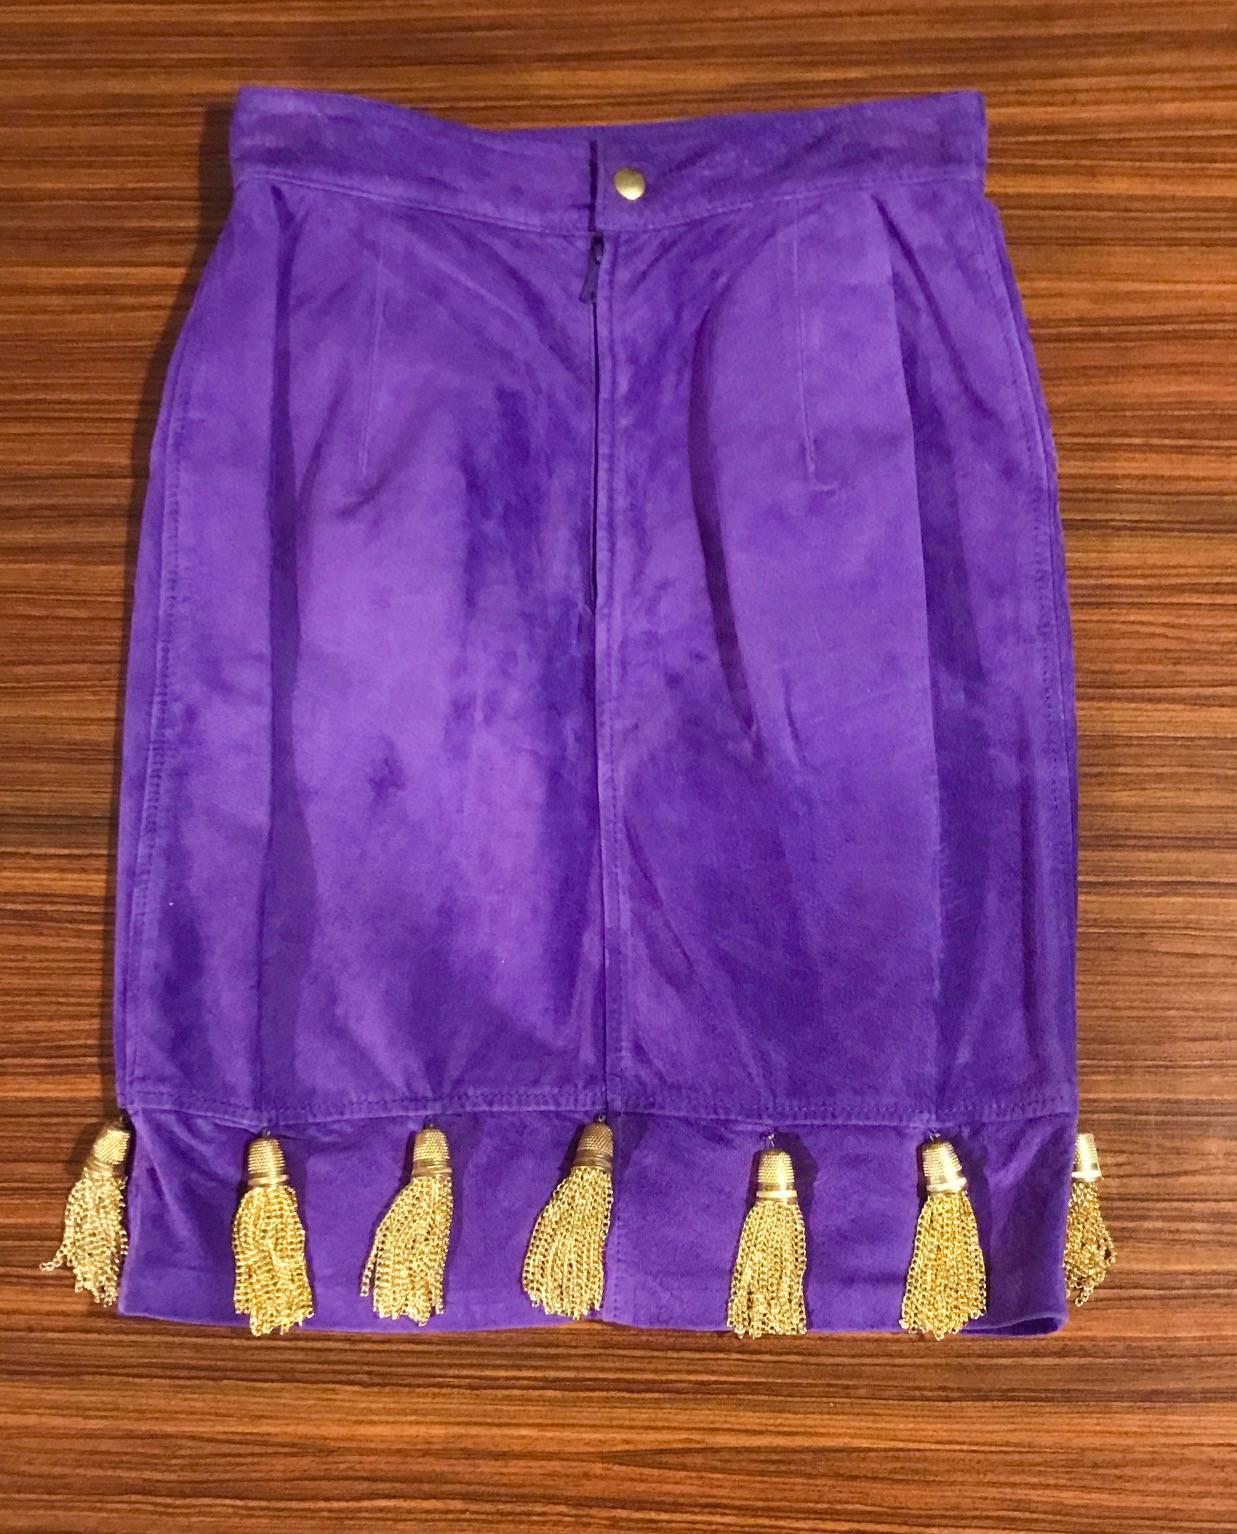 Moschino vintage 1980's 'Pret a Porter' purple suede pencil skirt. Gold thimbles with chain tassels dance around the hem and hang from two front zippered pockets. Back zip and snap.

100% leather.
Fully lined in 100% viscose.

Made in Italy.